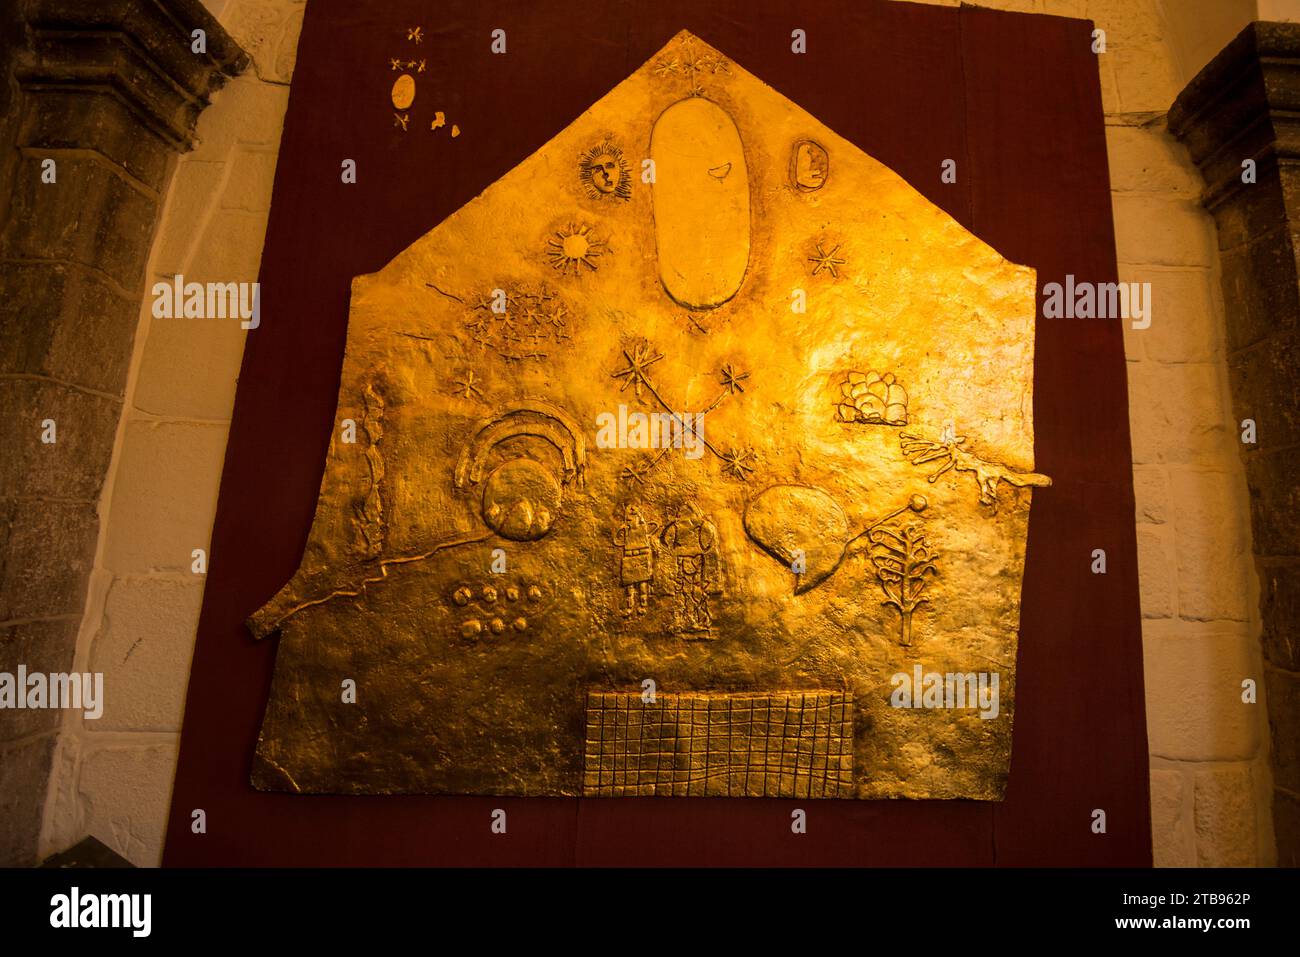 Inca Gold plate with a diagram of the principal elements of the Inca religion at the Sun Temple, Coricancha Museum; Cuzco, Peru Stock Photo